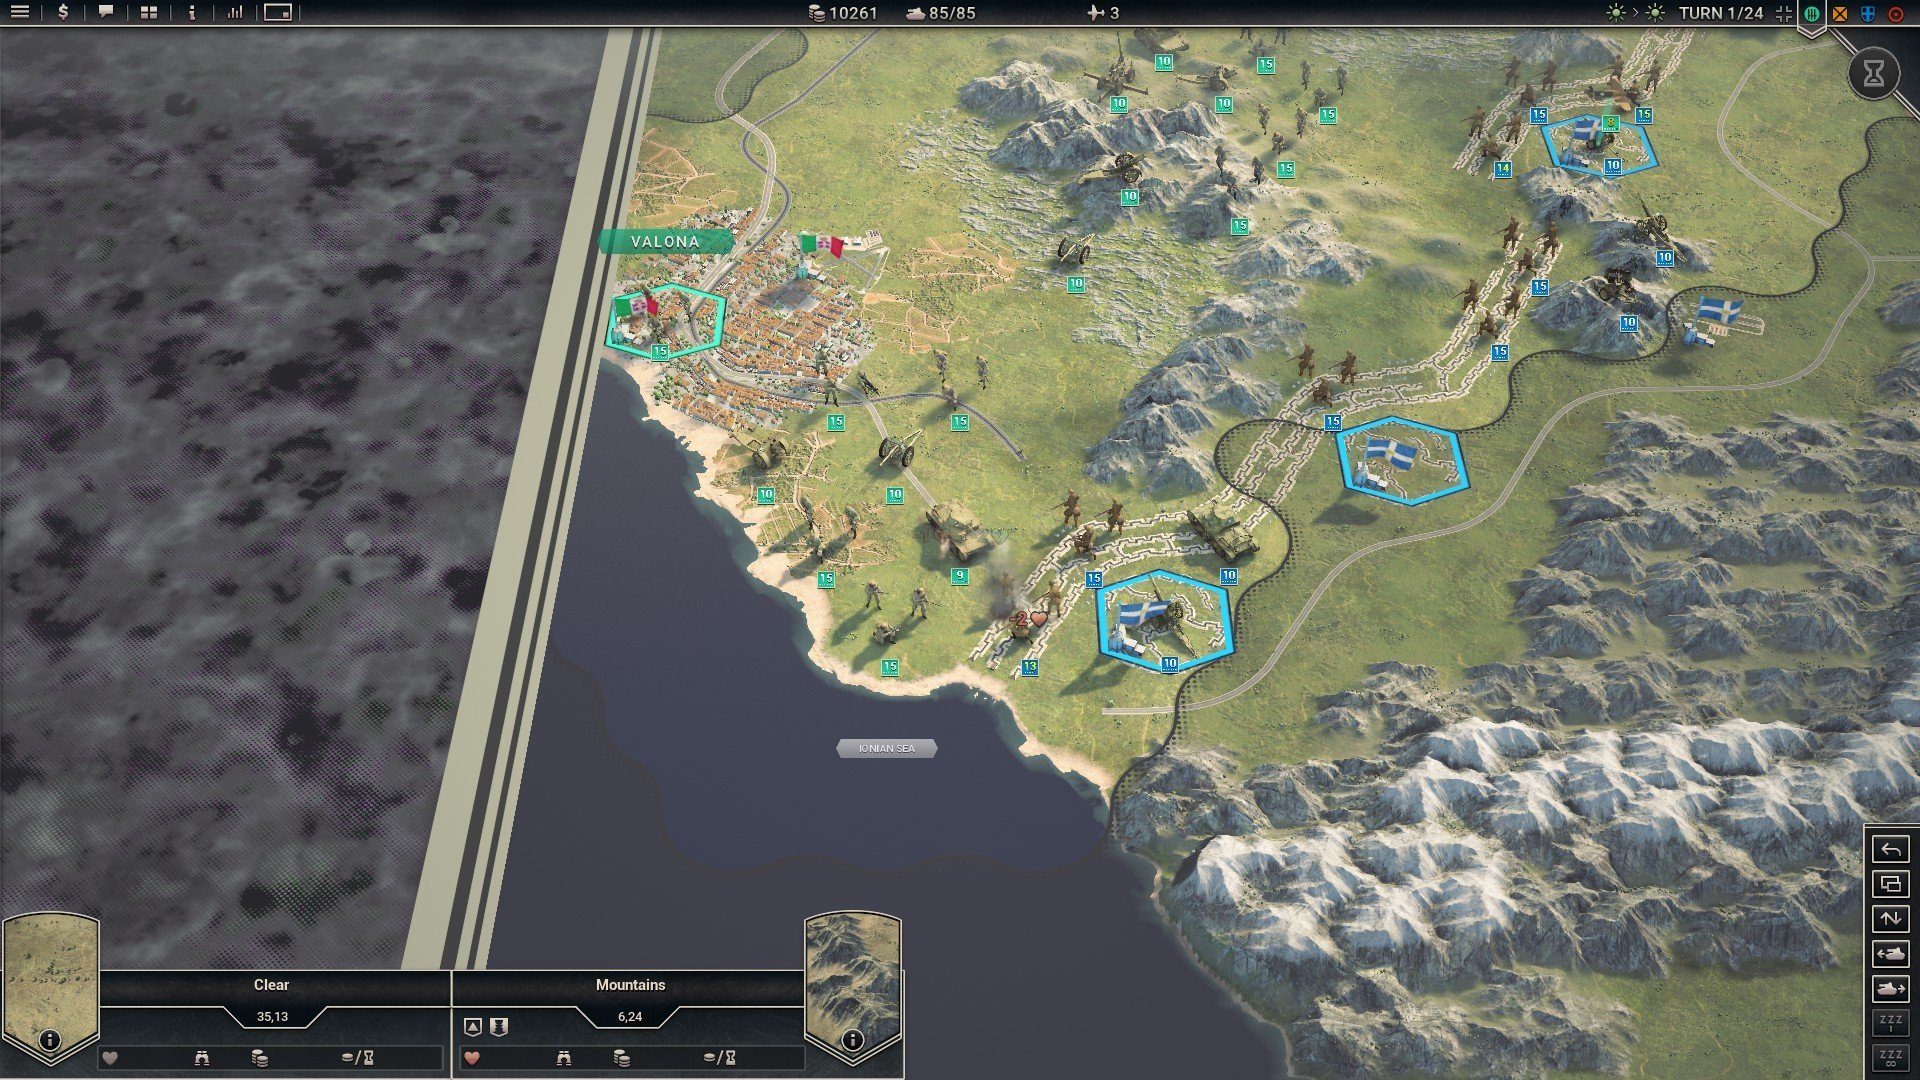 Panzer Corps 2 Axis Operations 1941 6